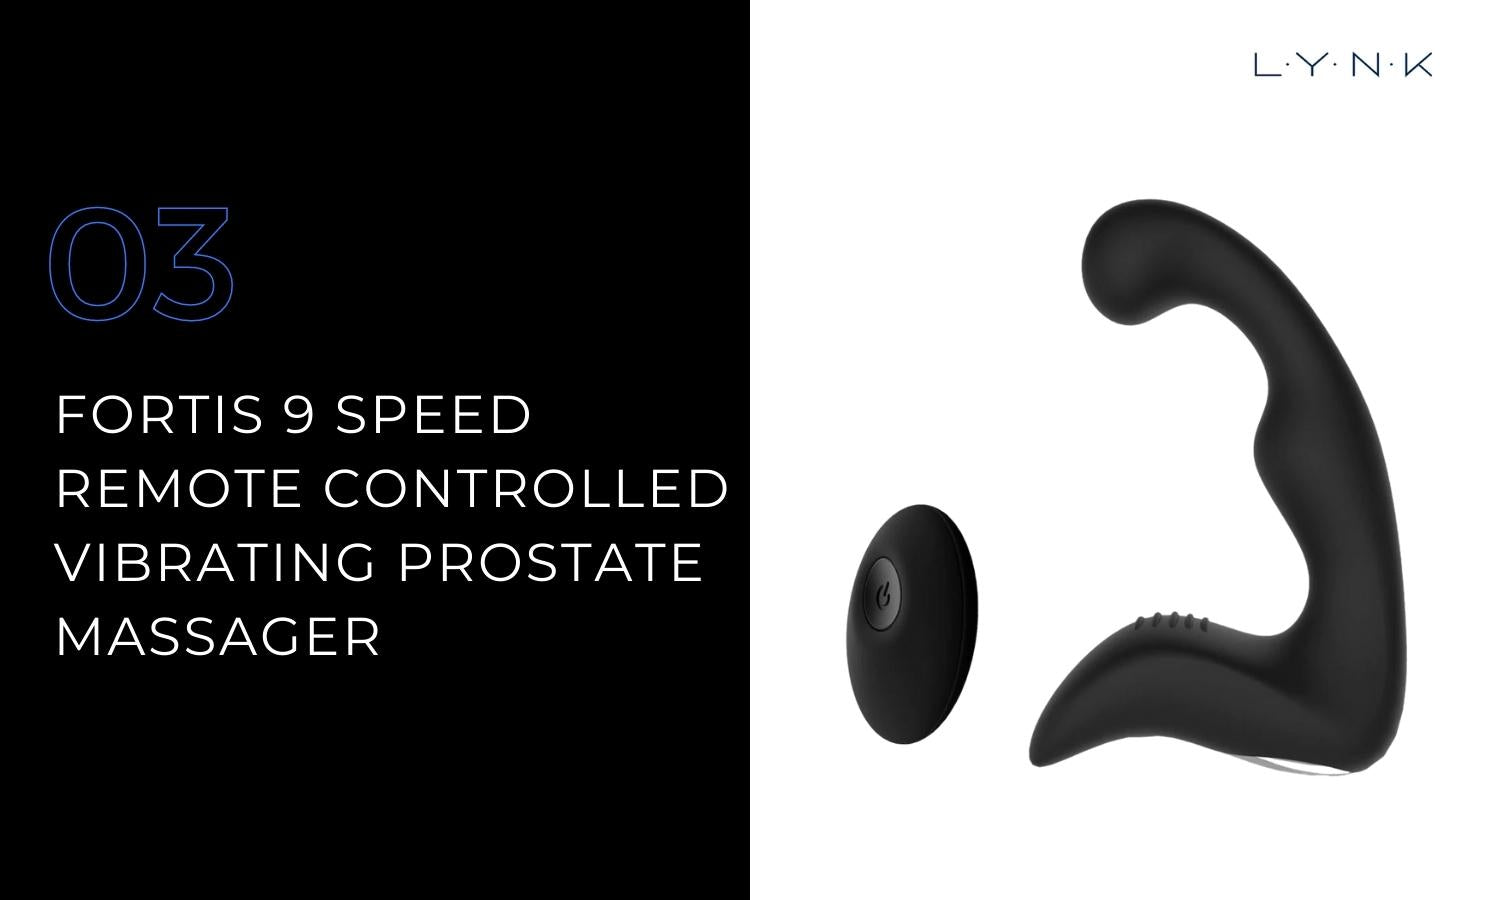 Fortis 9 Speed Remote - Controlled Vibrating Prostate Massager